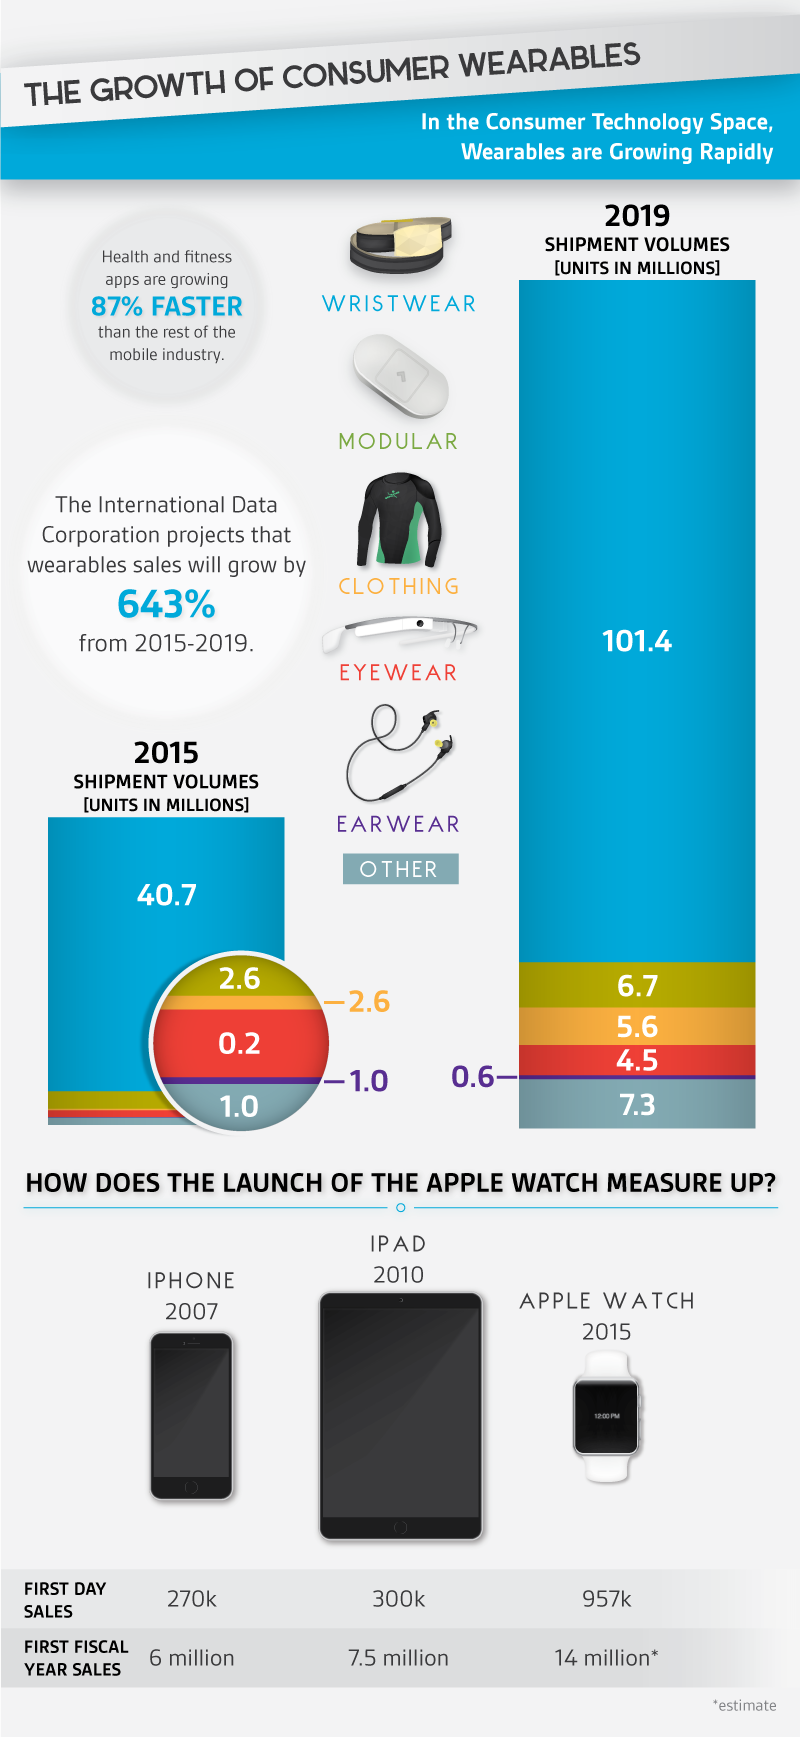 Putting the growth of the wearable technology industry in perspective.